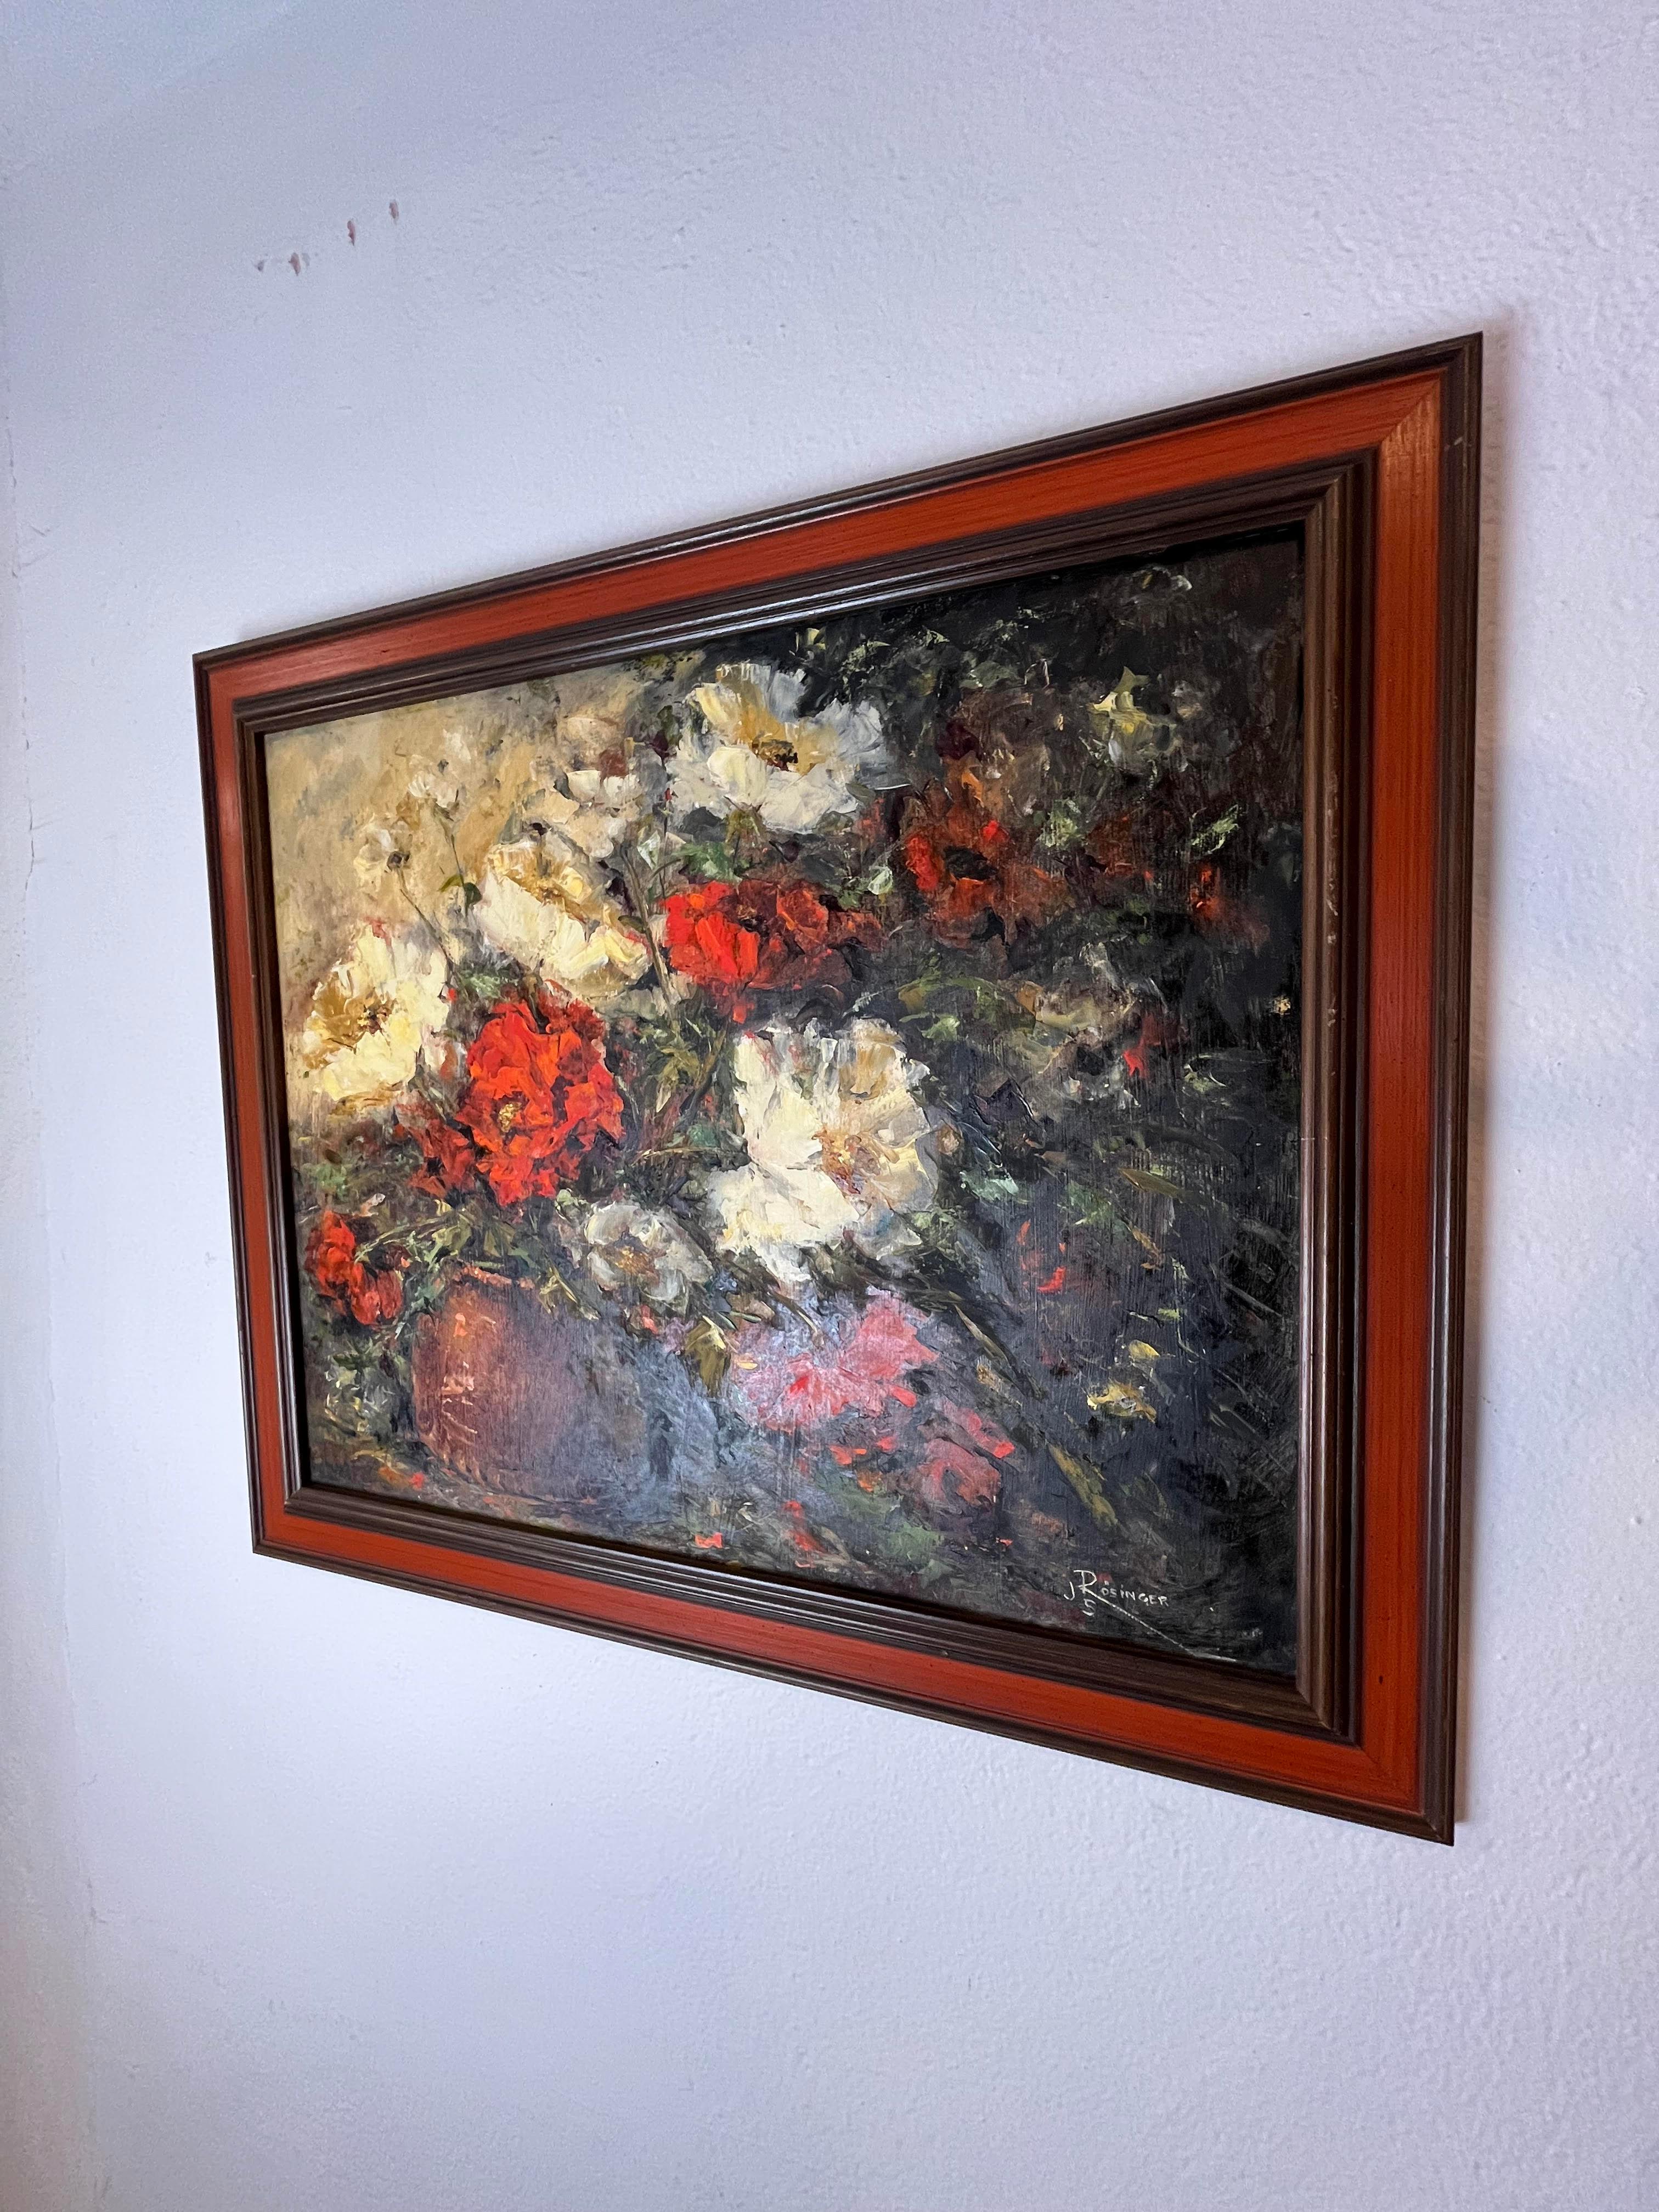 Beautiful floral bouquet still life. Oil on board. Dramatic color scheme framed in period mid century style. signed JS Rosinger